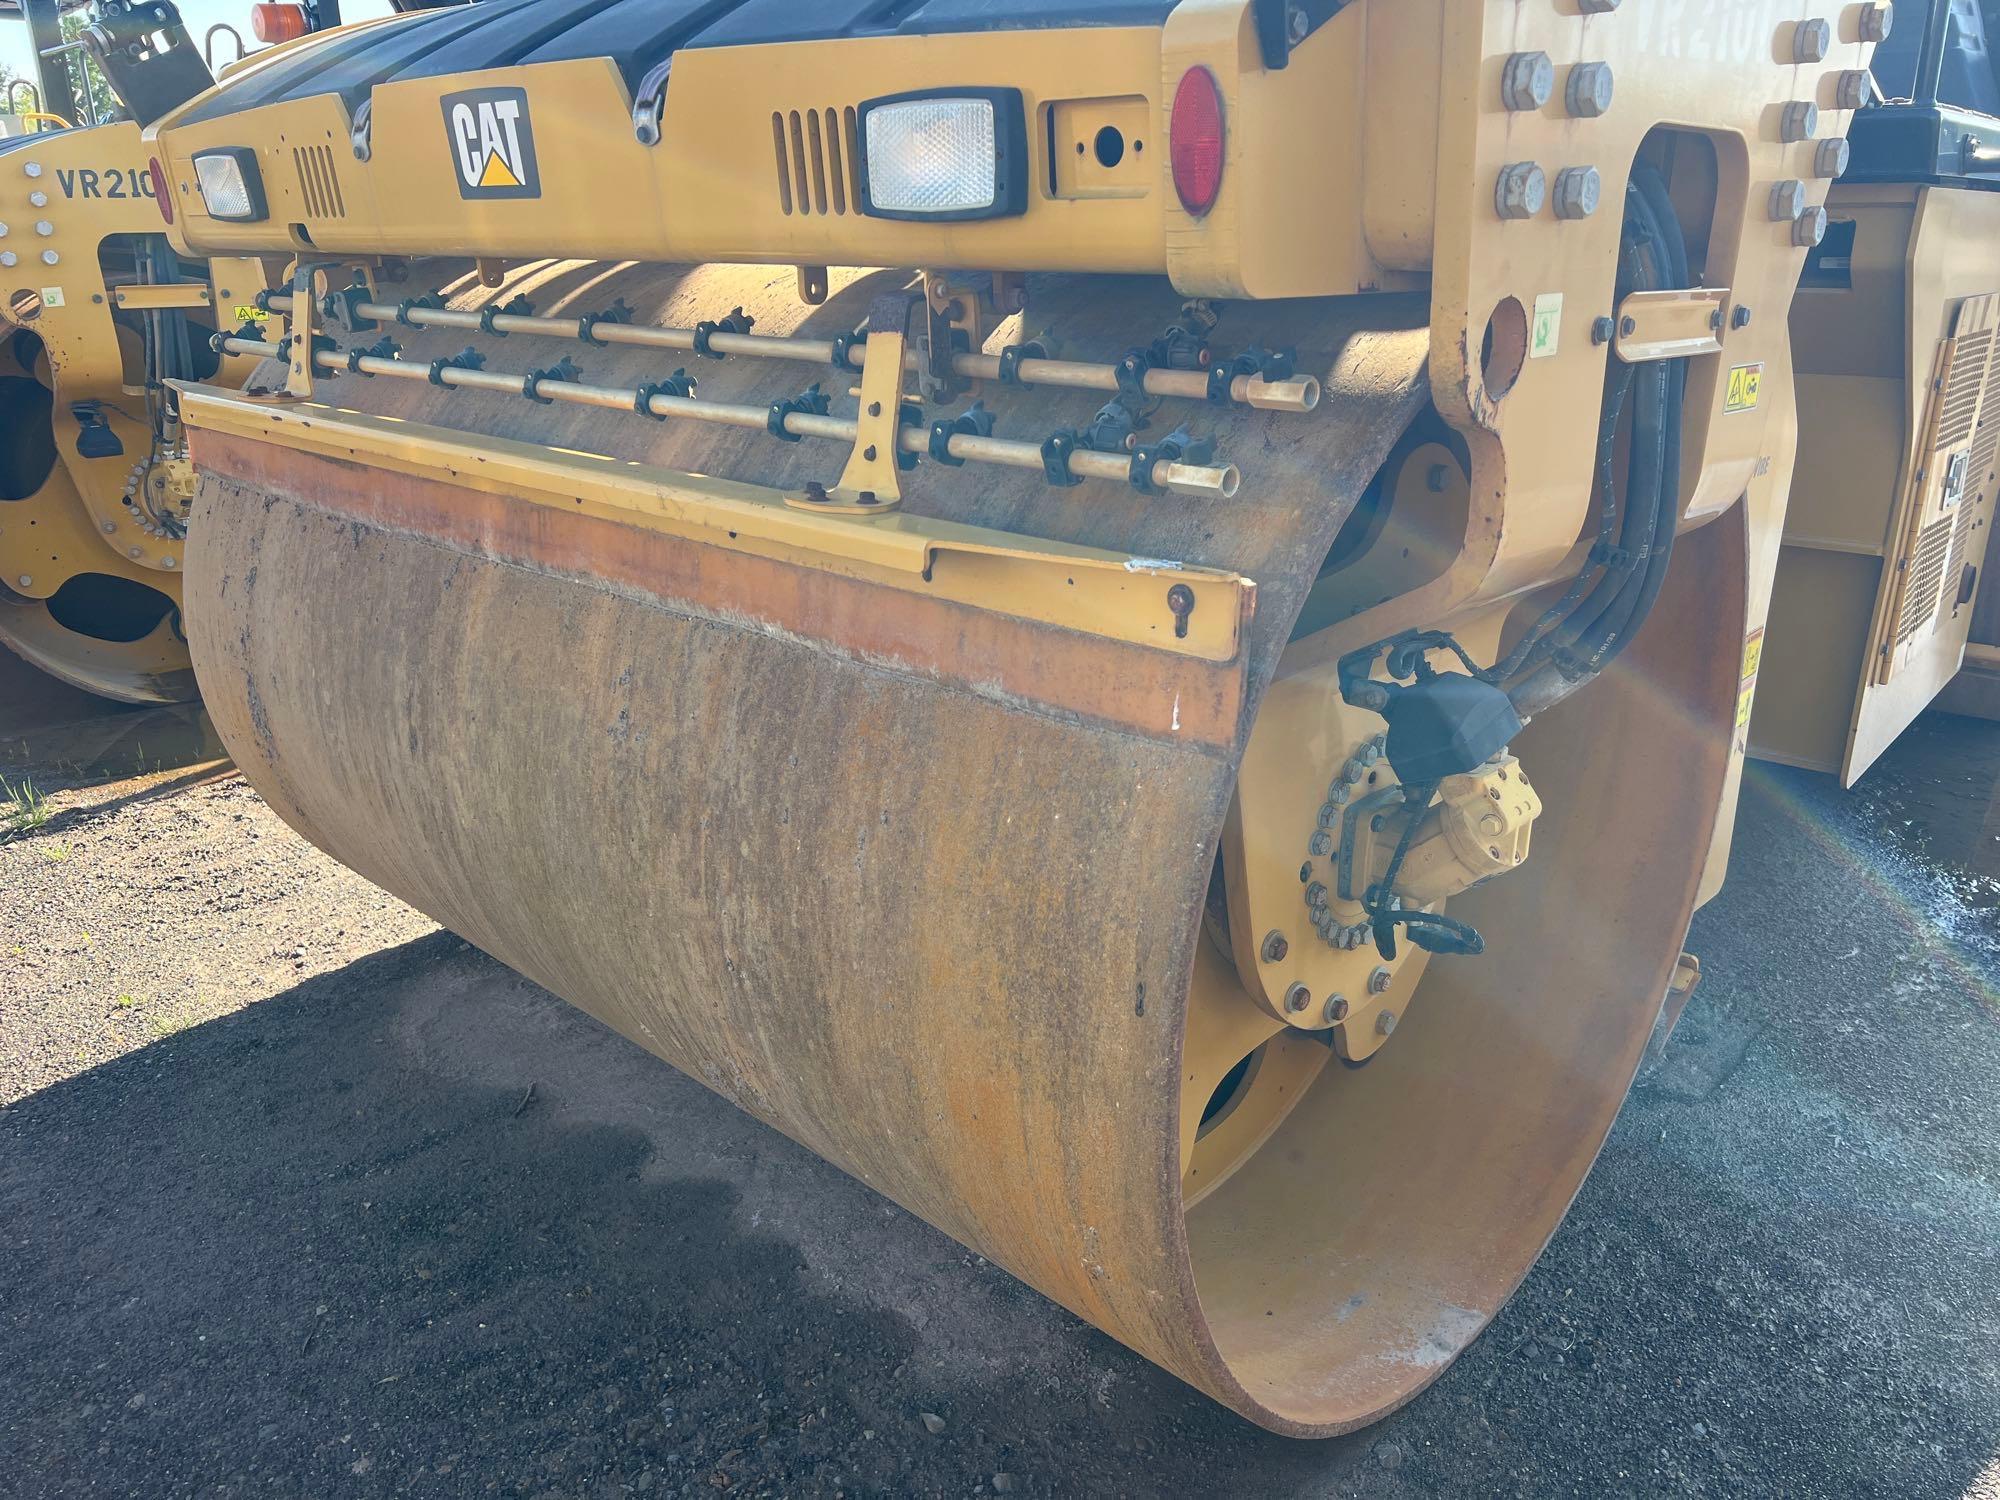 2017 CAT CB66B ASPHALT ROLLER SN:B6600253 powered by Cat diesel engine, equipped with OROPS, 84in.